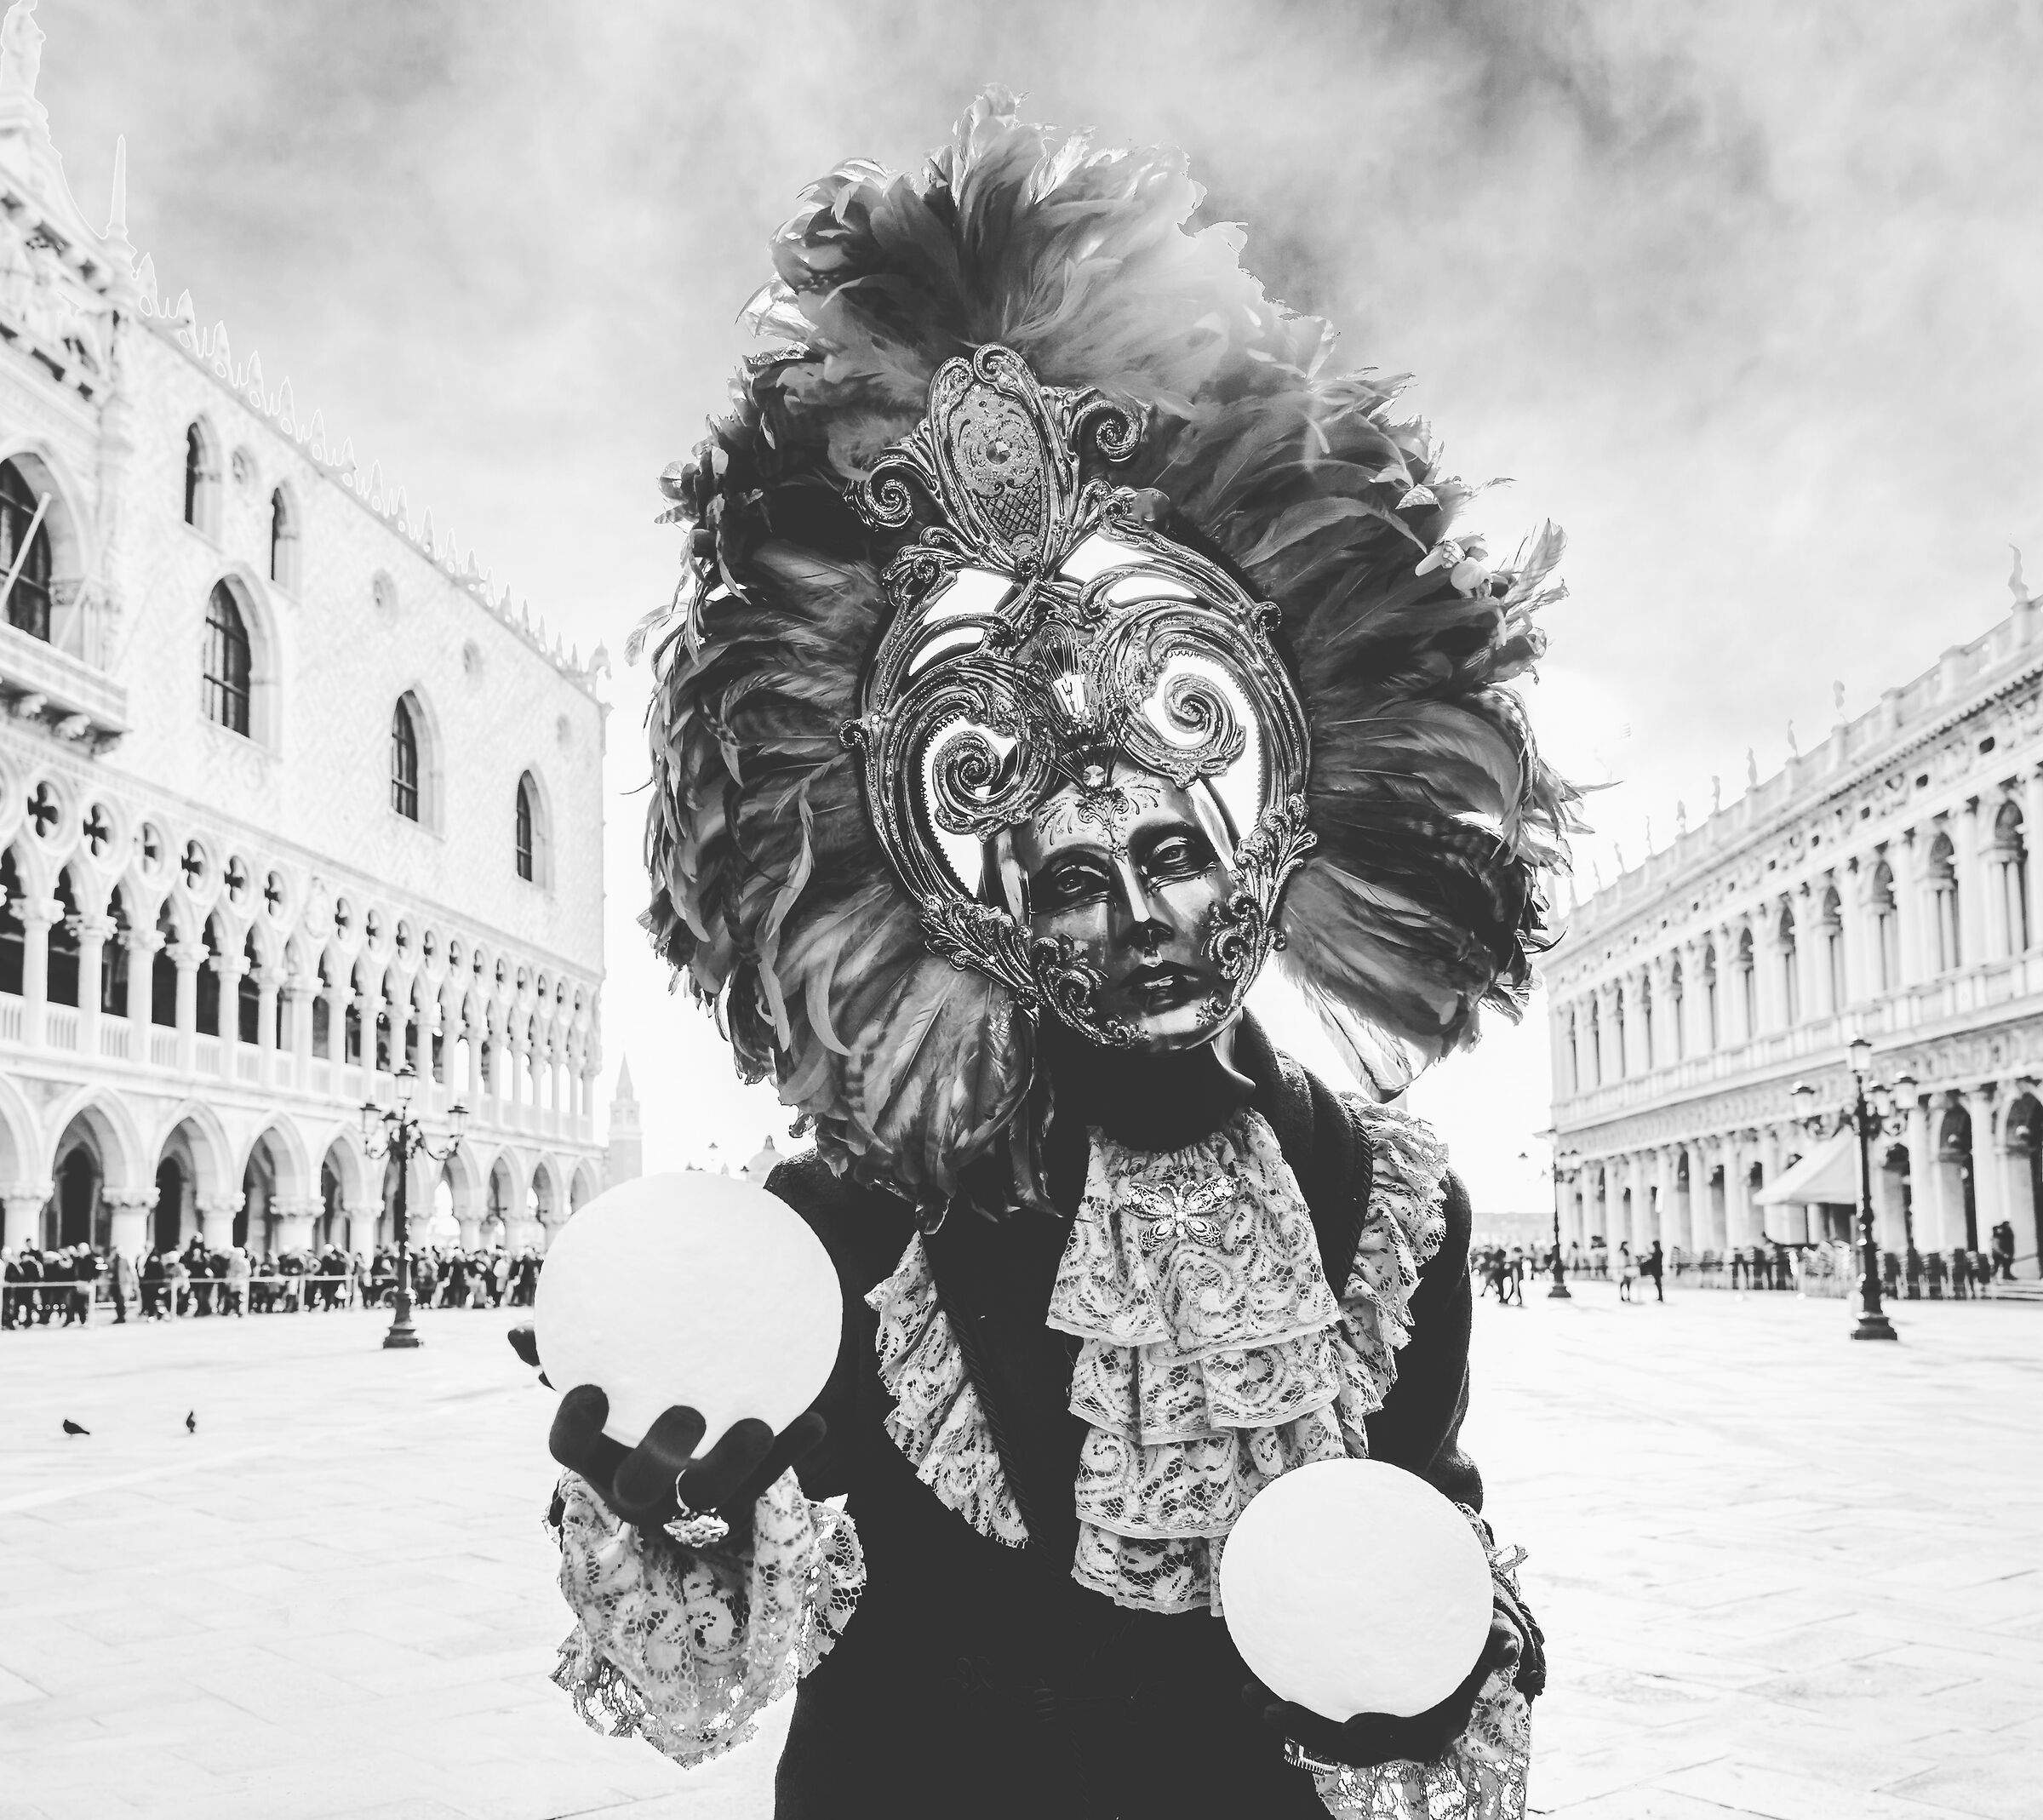 Once upon a time there were the Venetian Masks ...